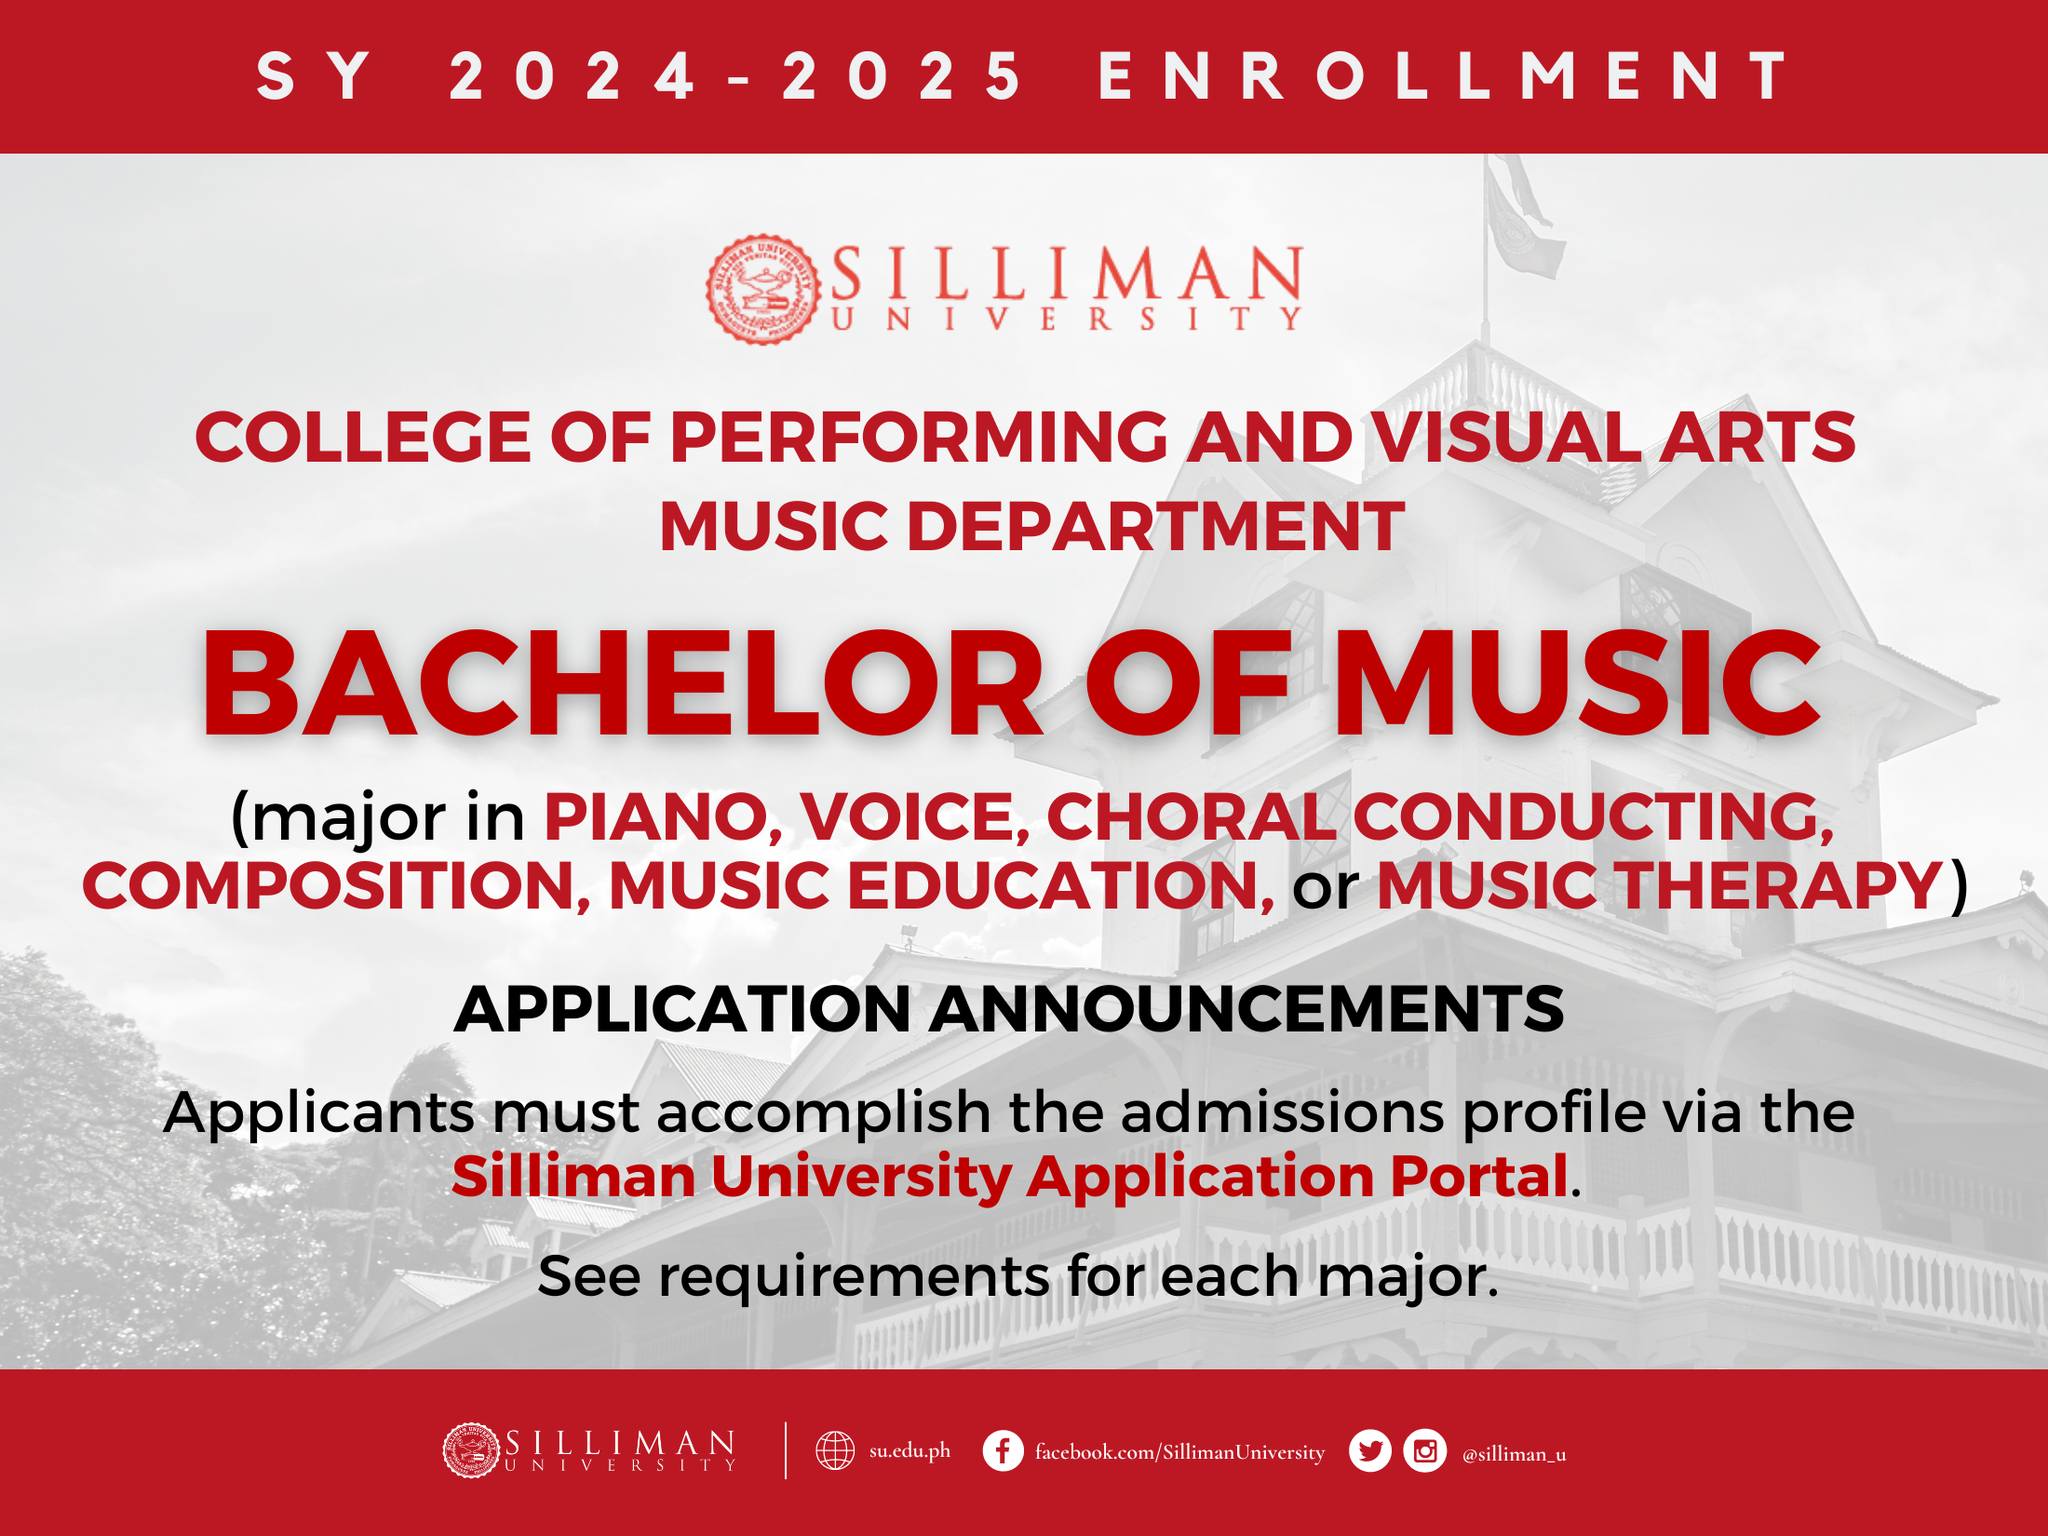 College of Performing and Visual Arts (COPVA) – Music Department is now accepting applications for the following degrees for SY 2024-2025